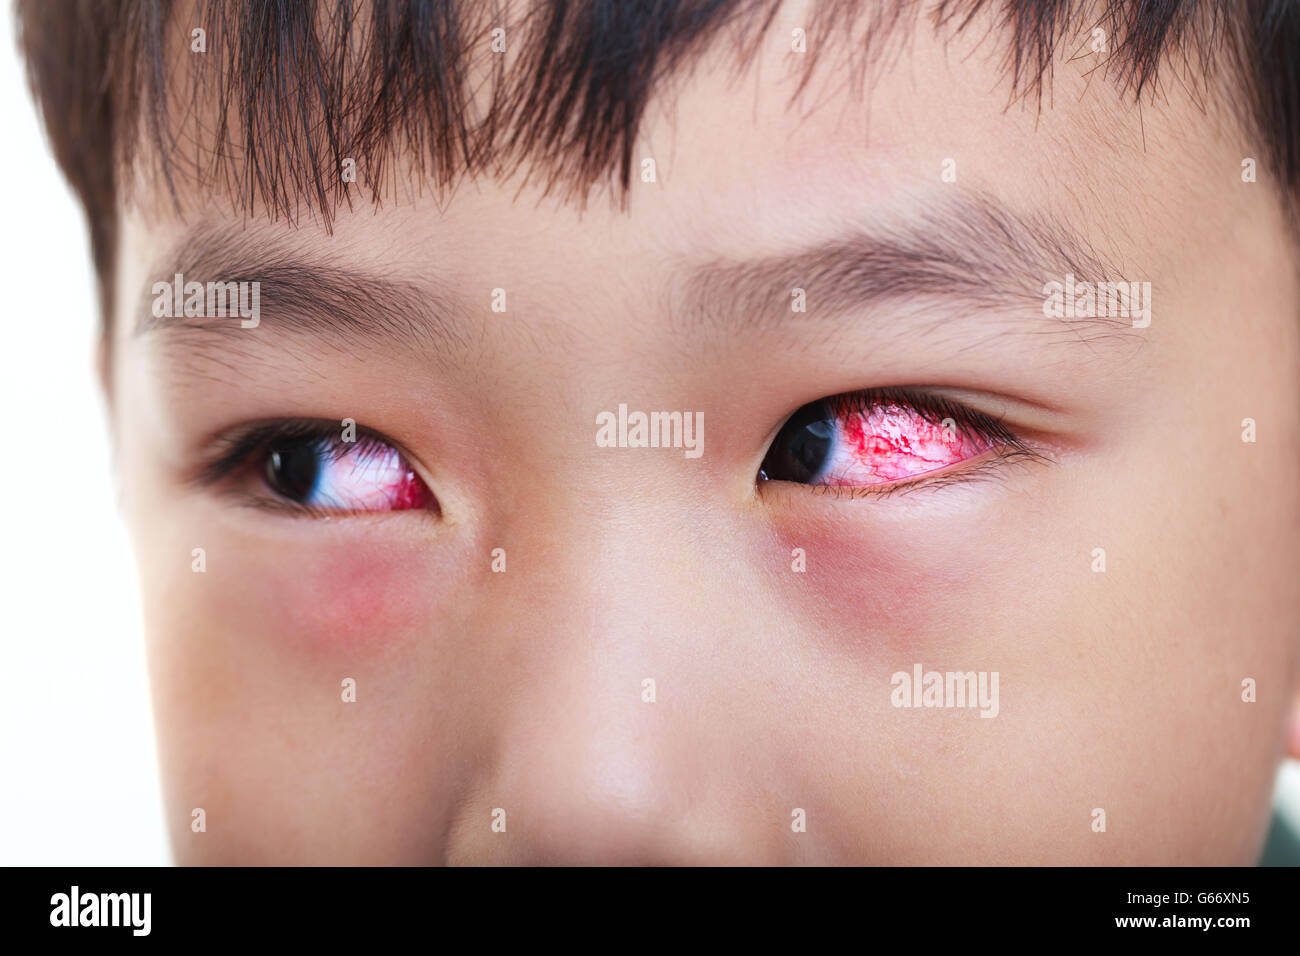 Closeup of chronic conjunctivitis with a red iris. Shallow depth of field (dof), left eye of asian child in focus. Stock Photo